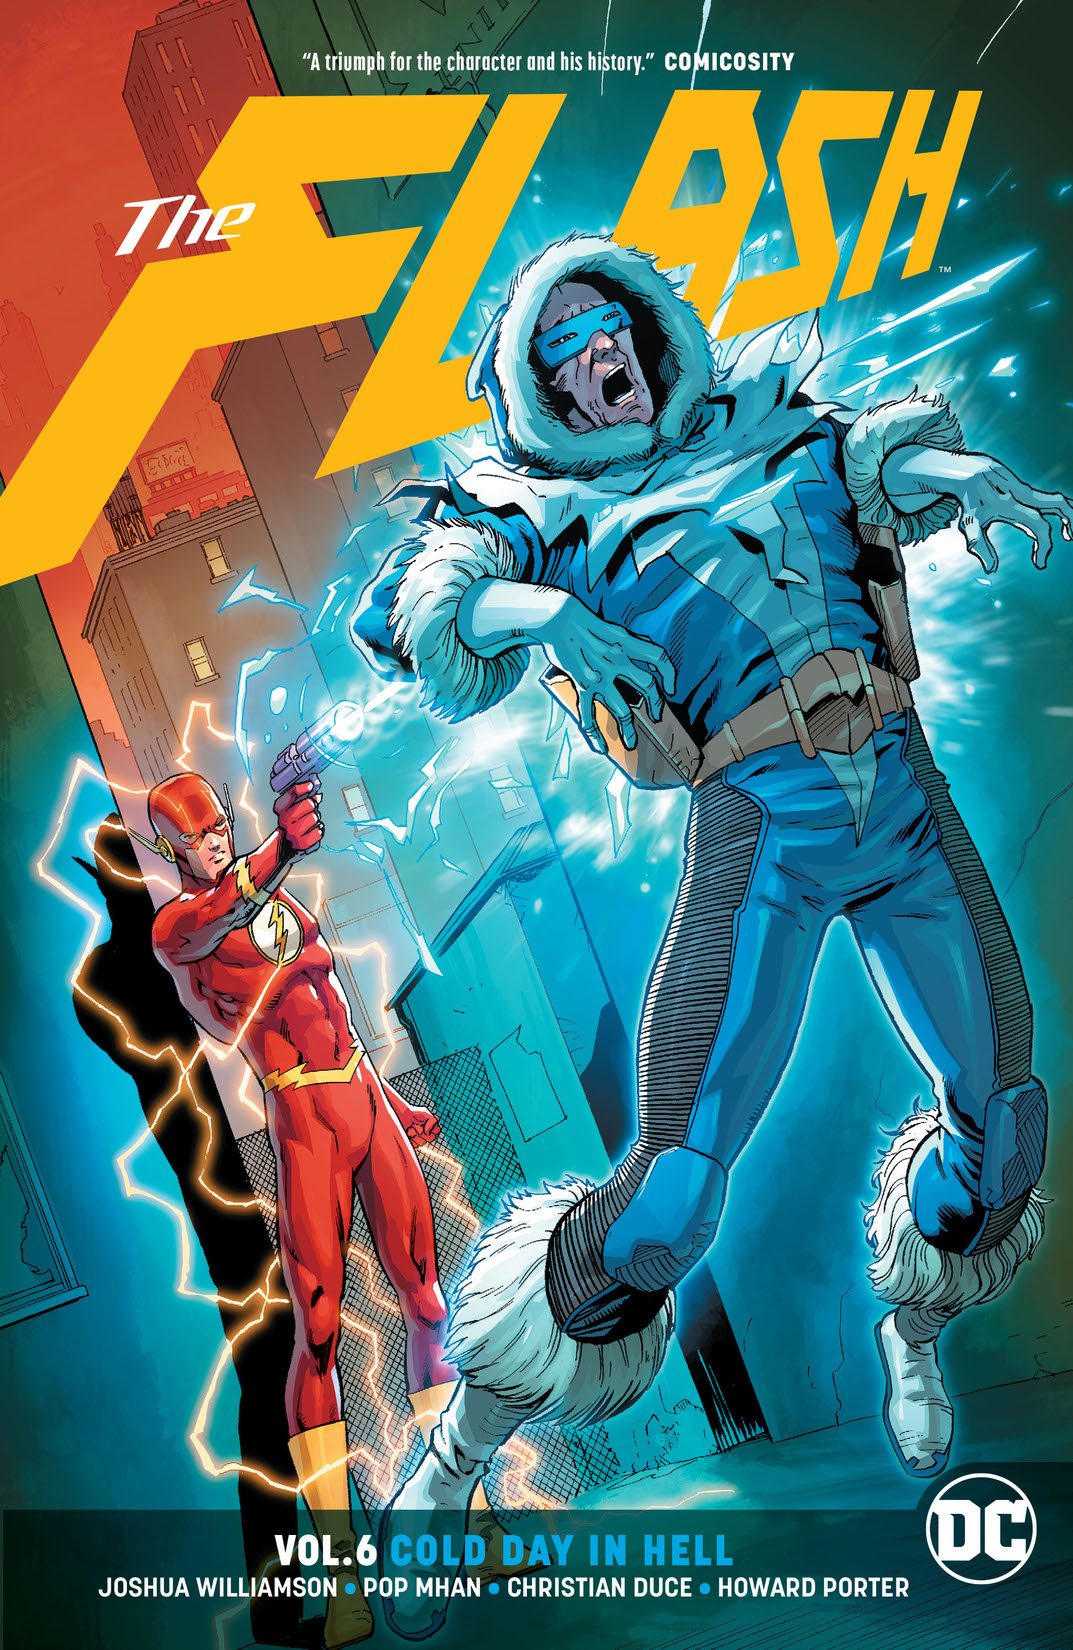 Flash Vol. 6: Cold Day in Hell preview images